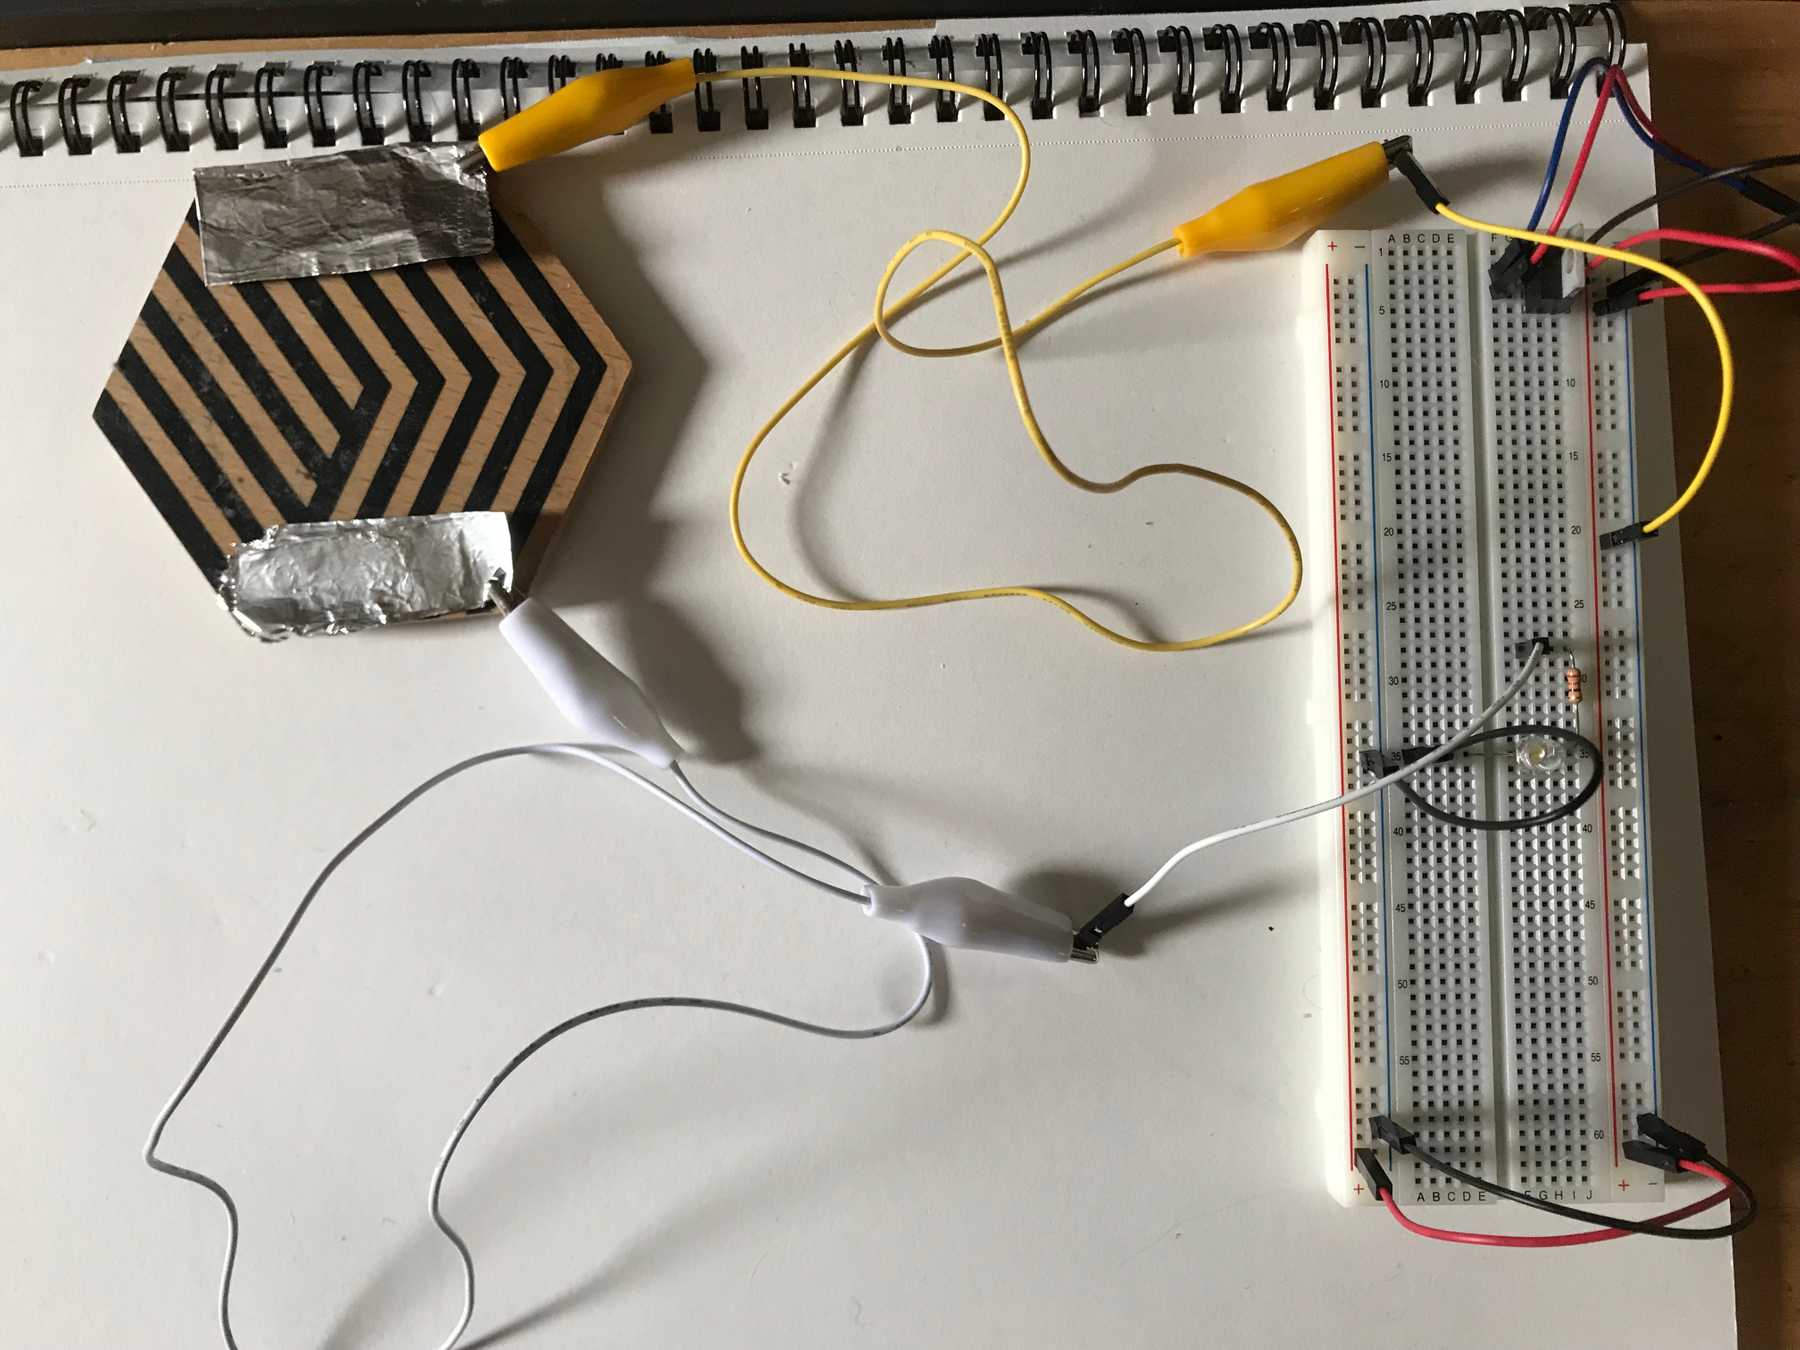 Wiring the coaster switch to the breadboard by connecting one side to Vin and the other to the resistor's input